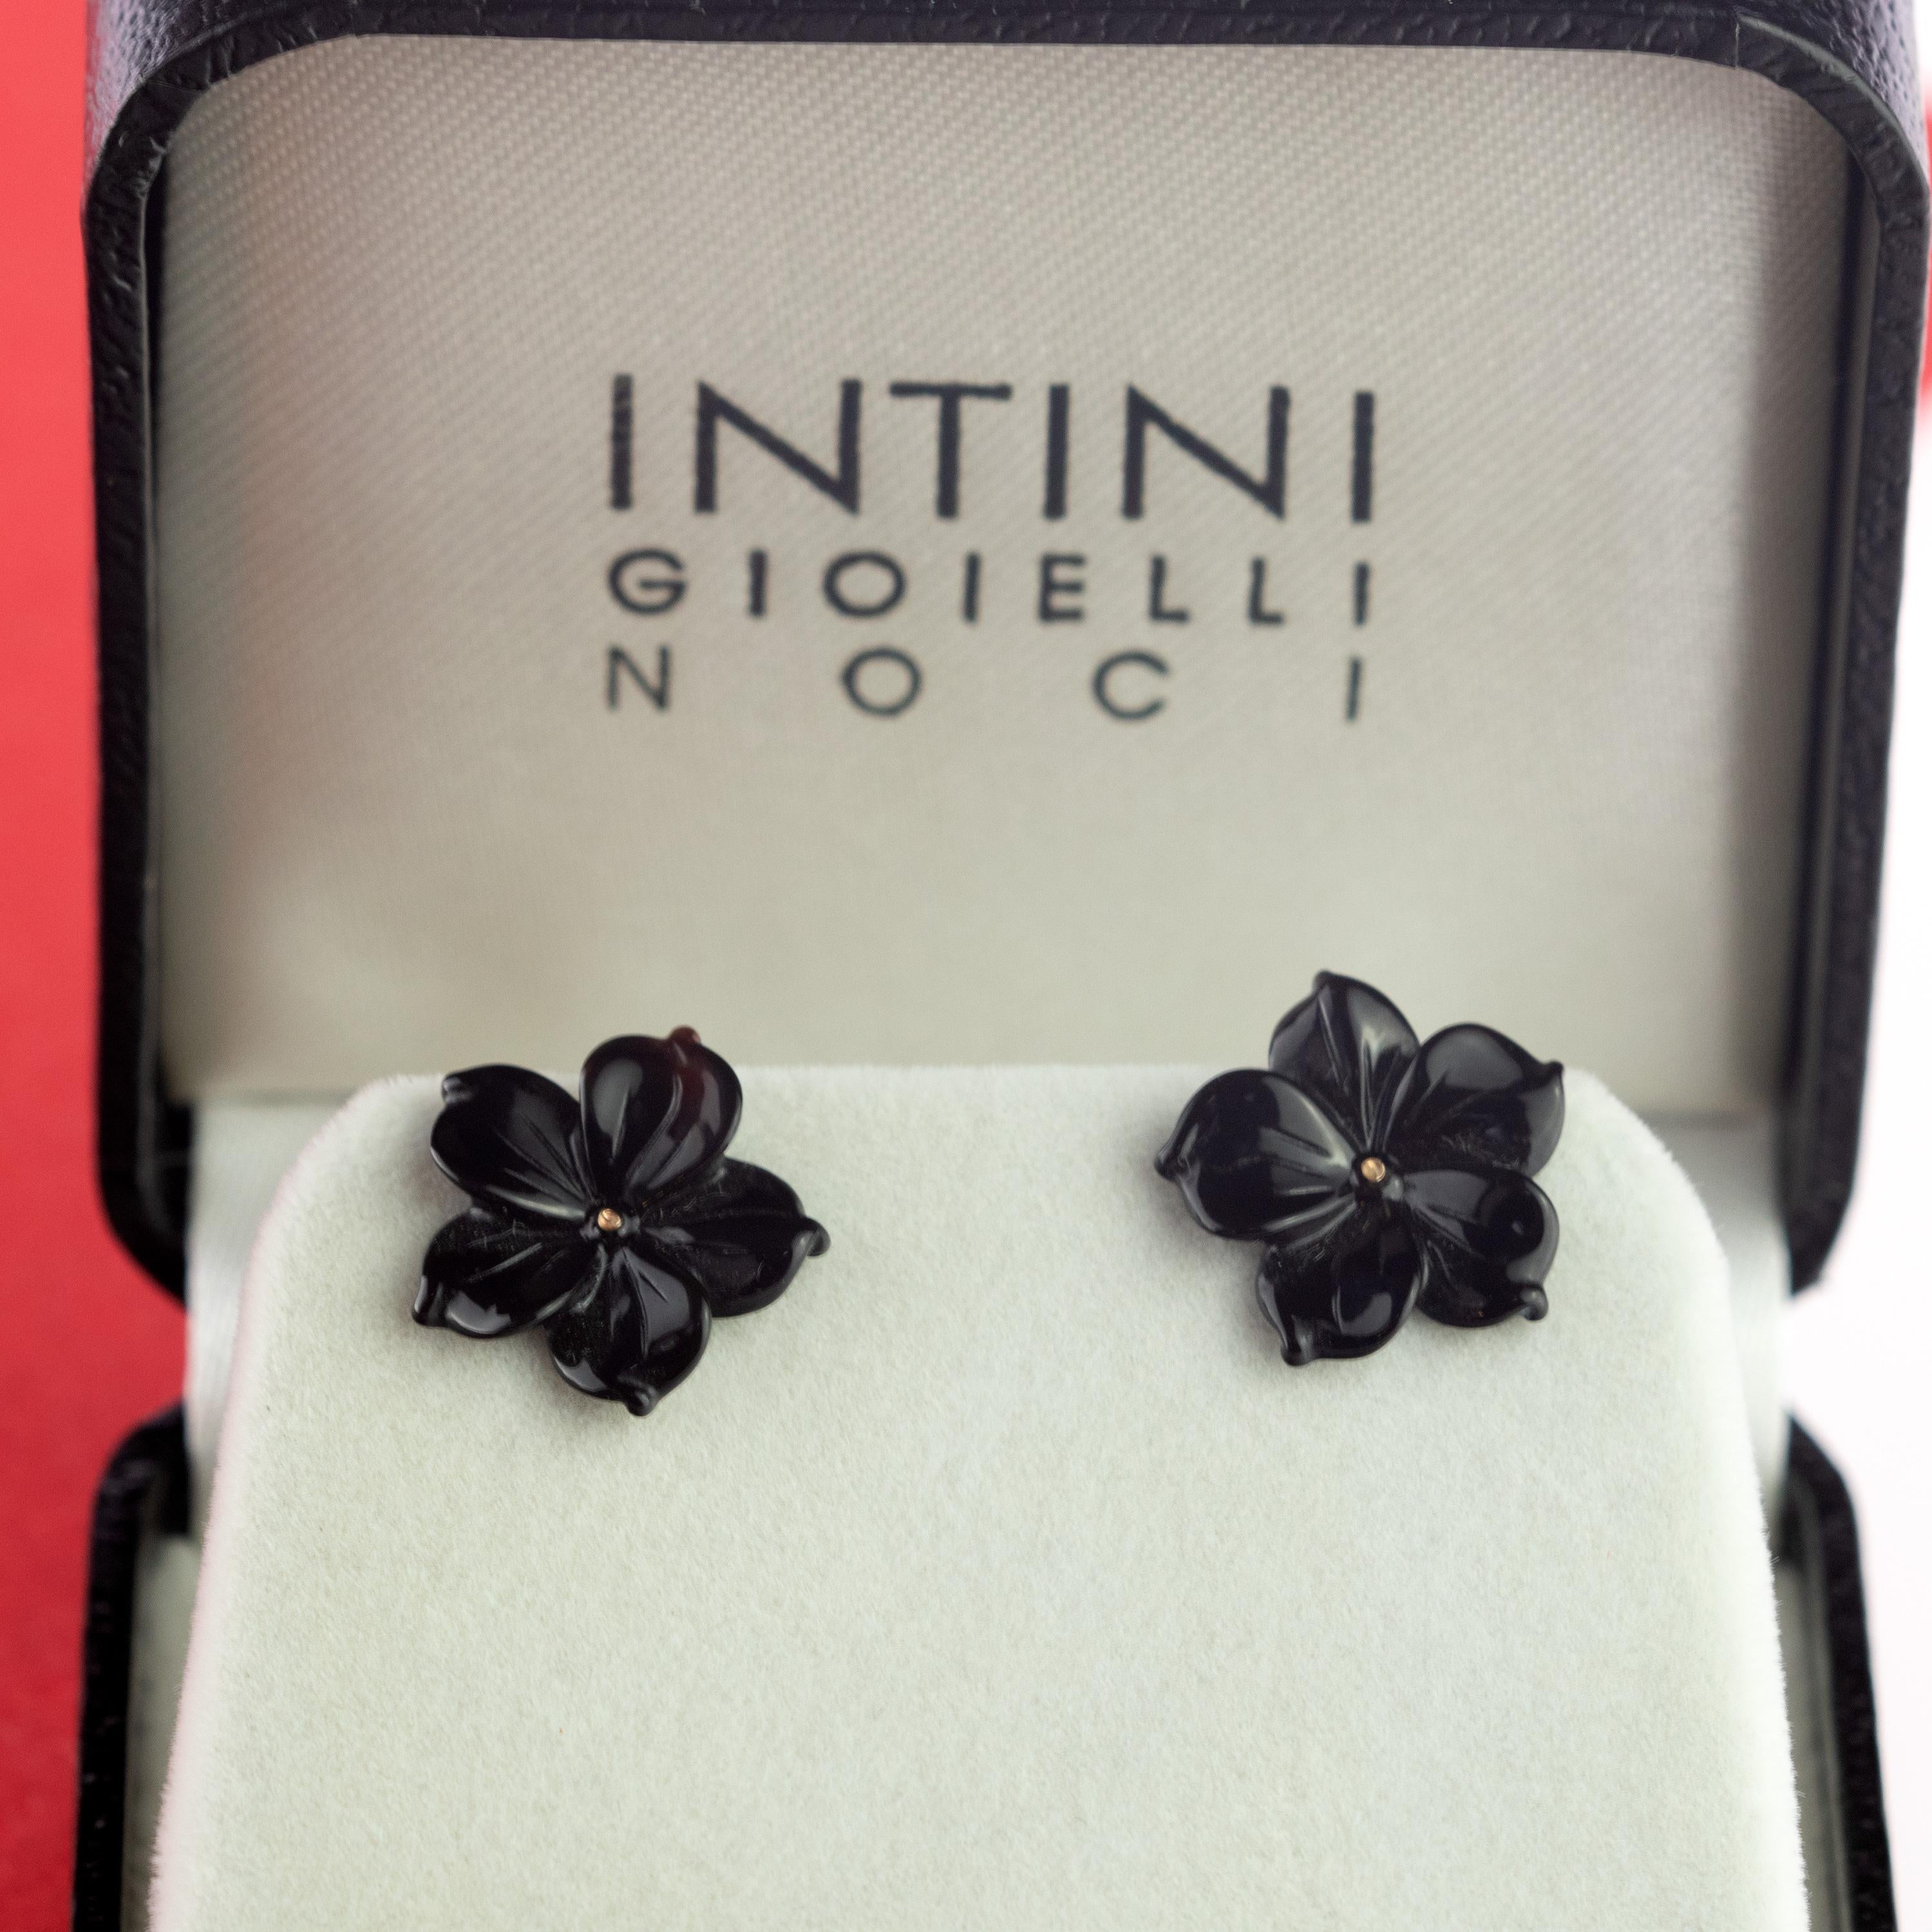 Astonishing and delicate 6 carat black agate flower stud earrings. Carved petals that evoke the italian handmade traditional jewelry work, wrapping itself in a soft look enriched with Gold Plate manifesting glamour and exquisite taste. 
 
Inspired